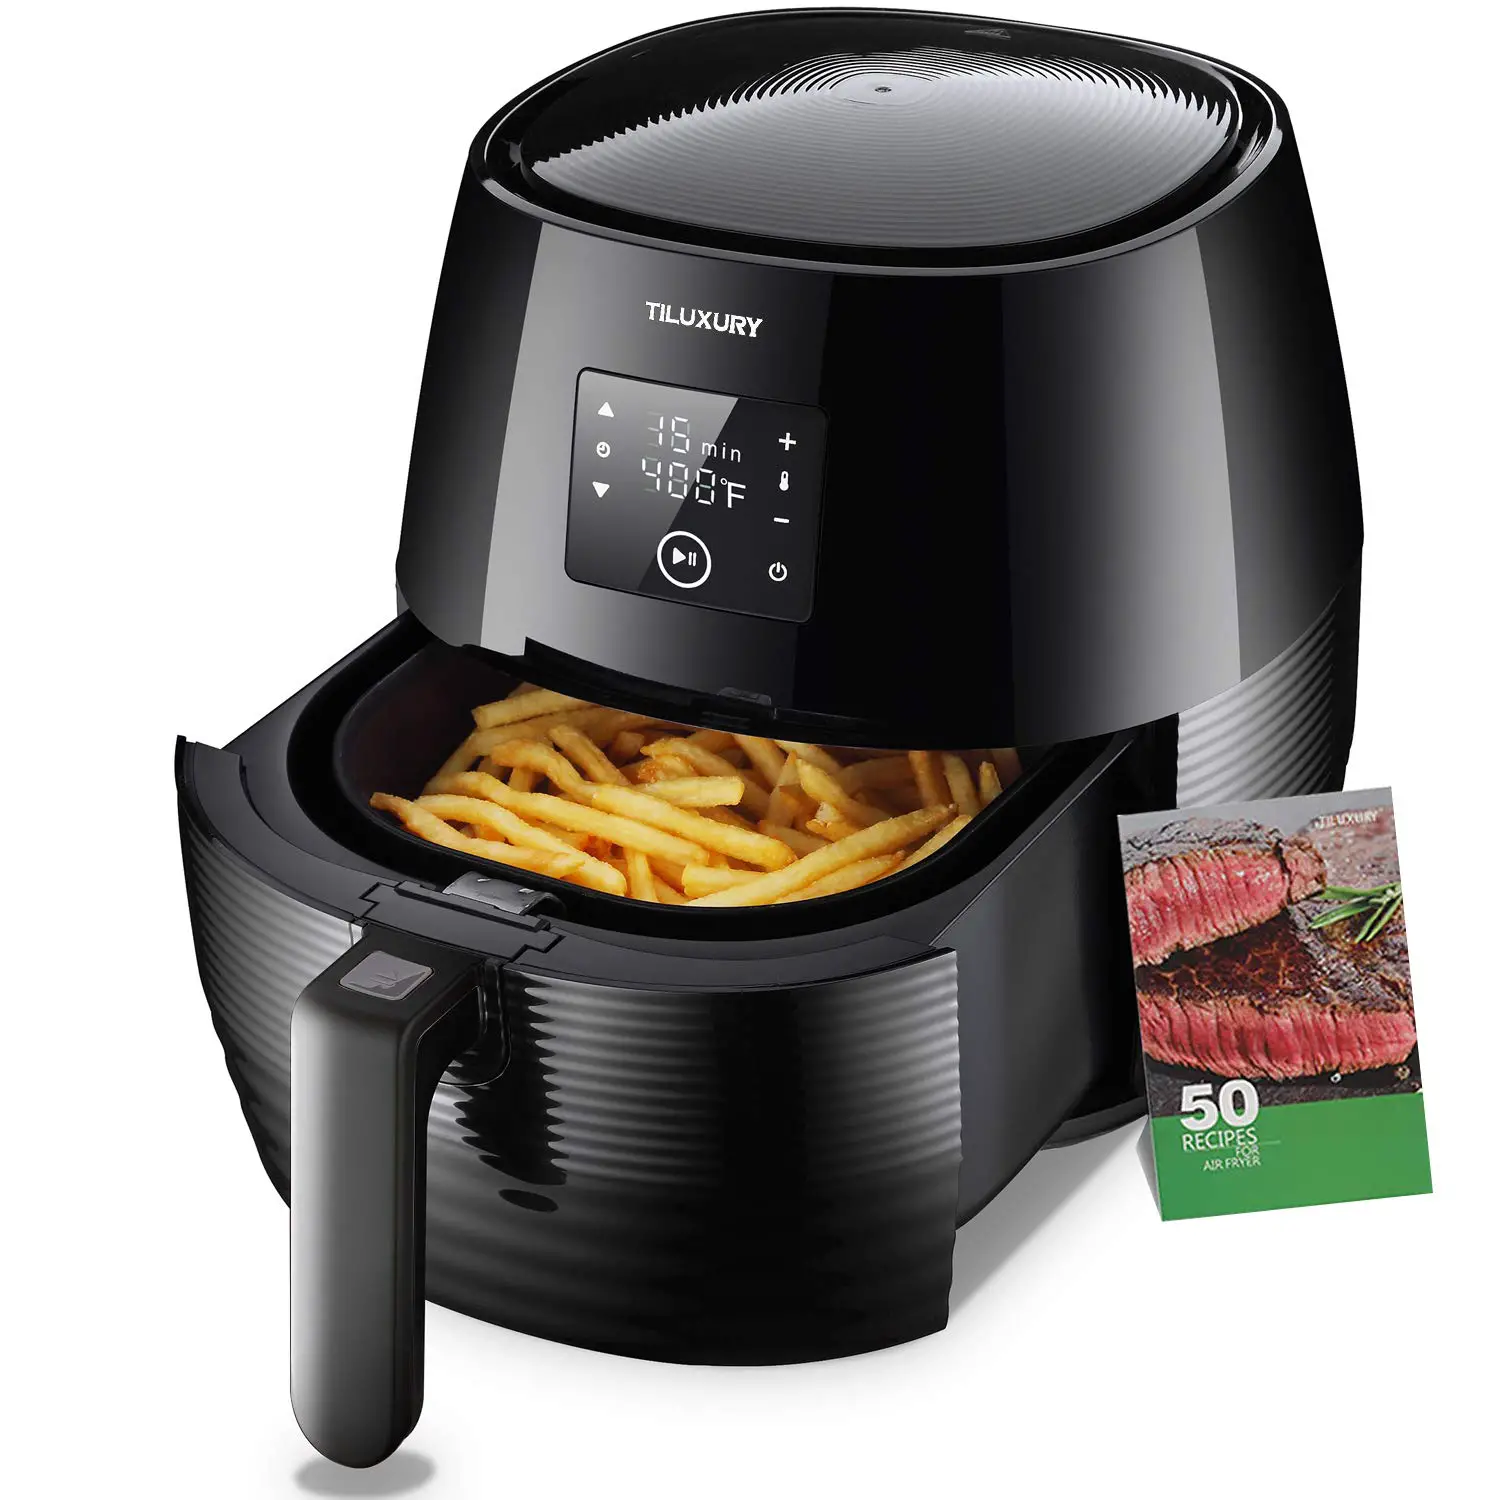 The 10 Best Amazon Certified Refurbished Air Fryer